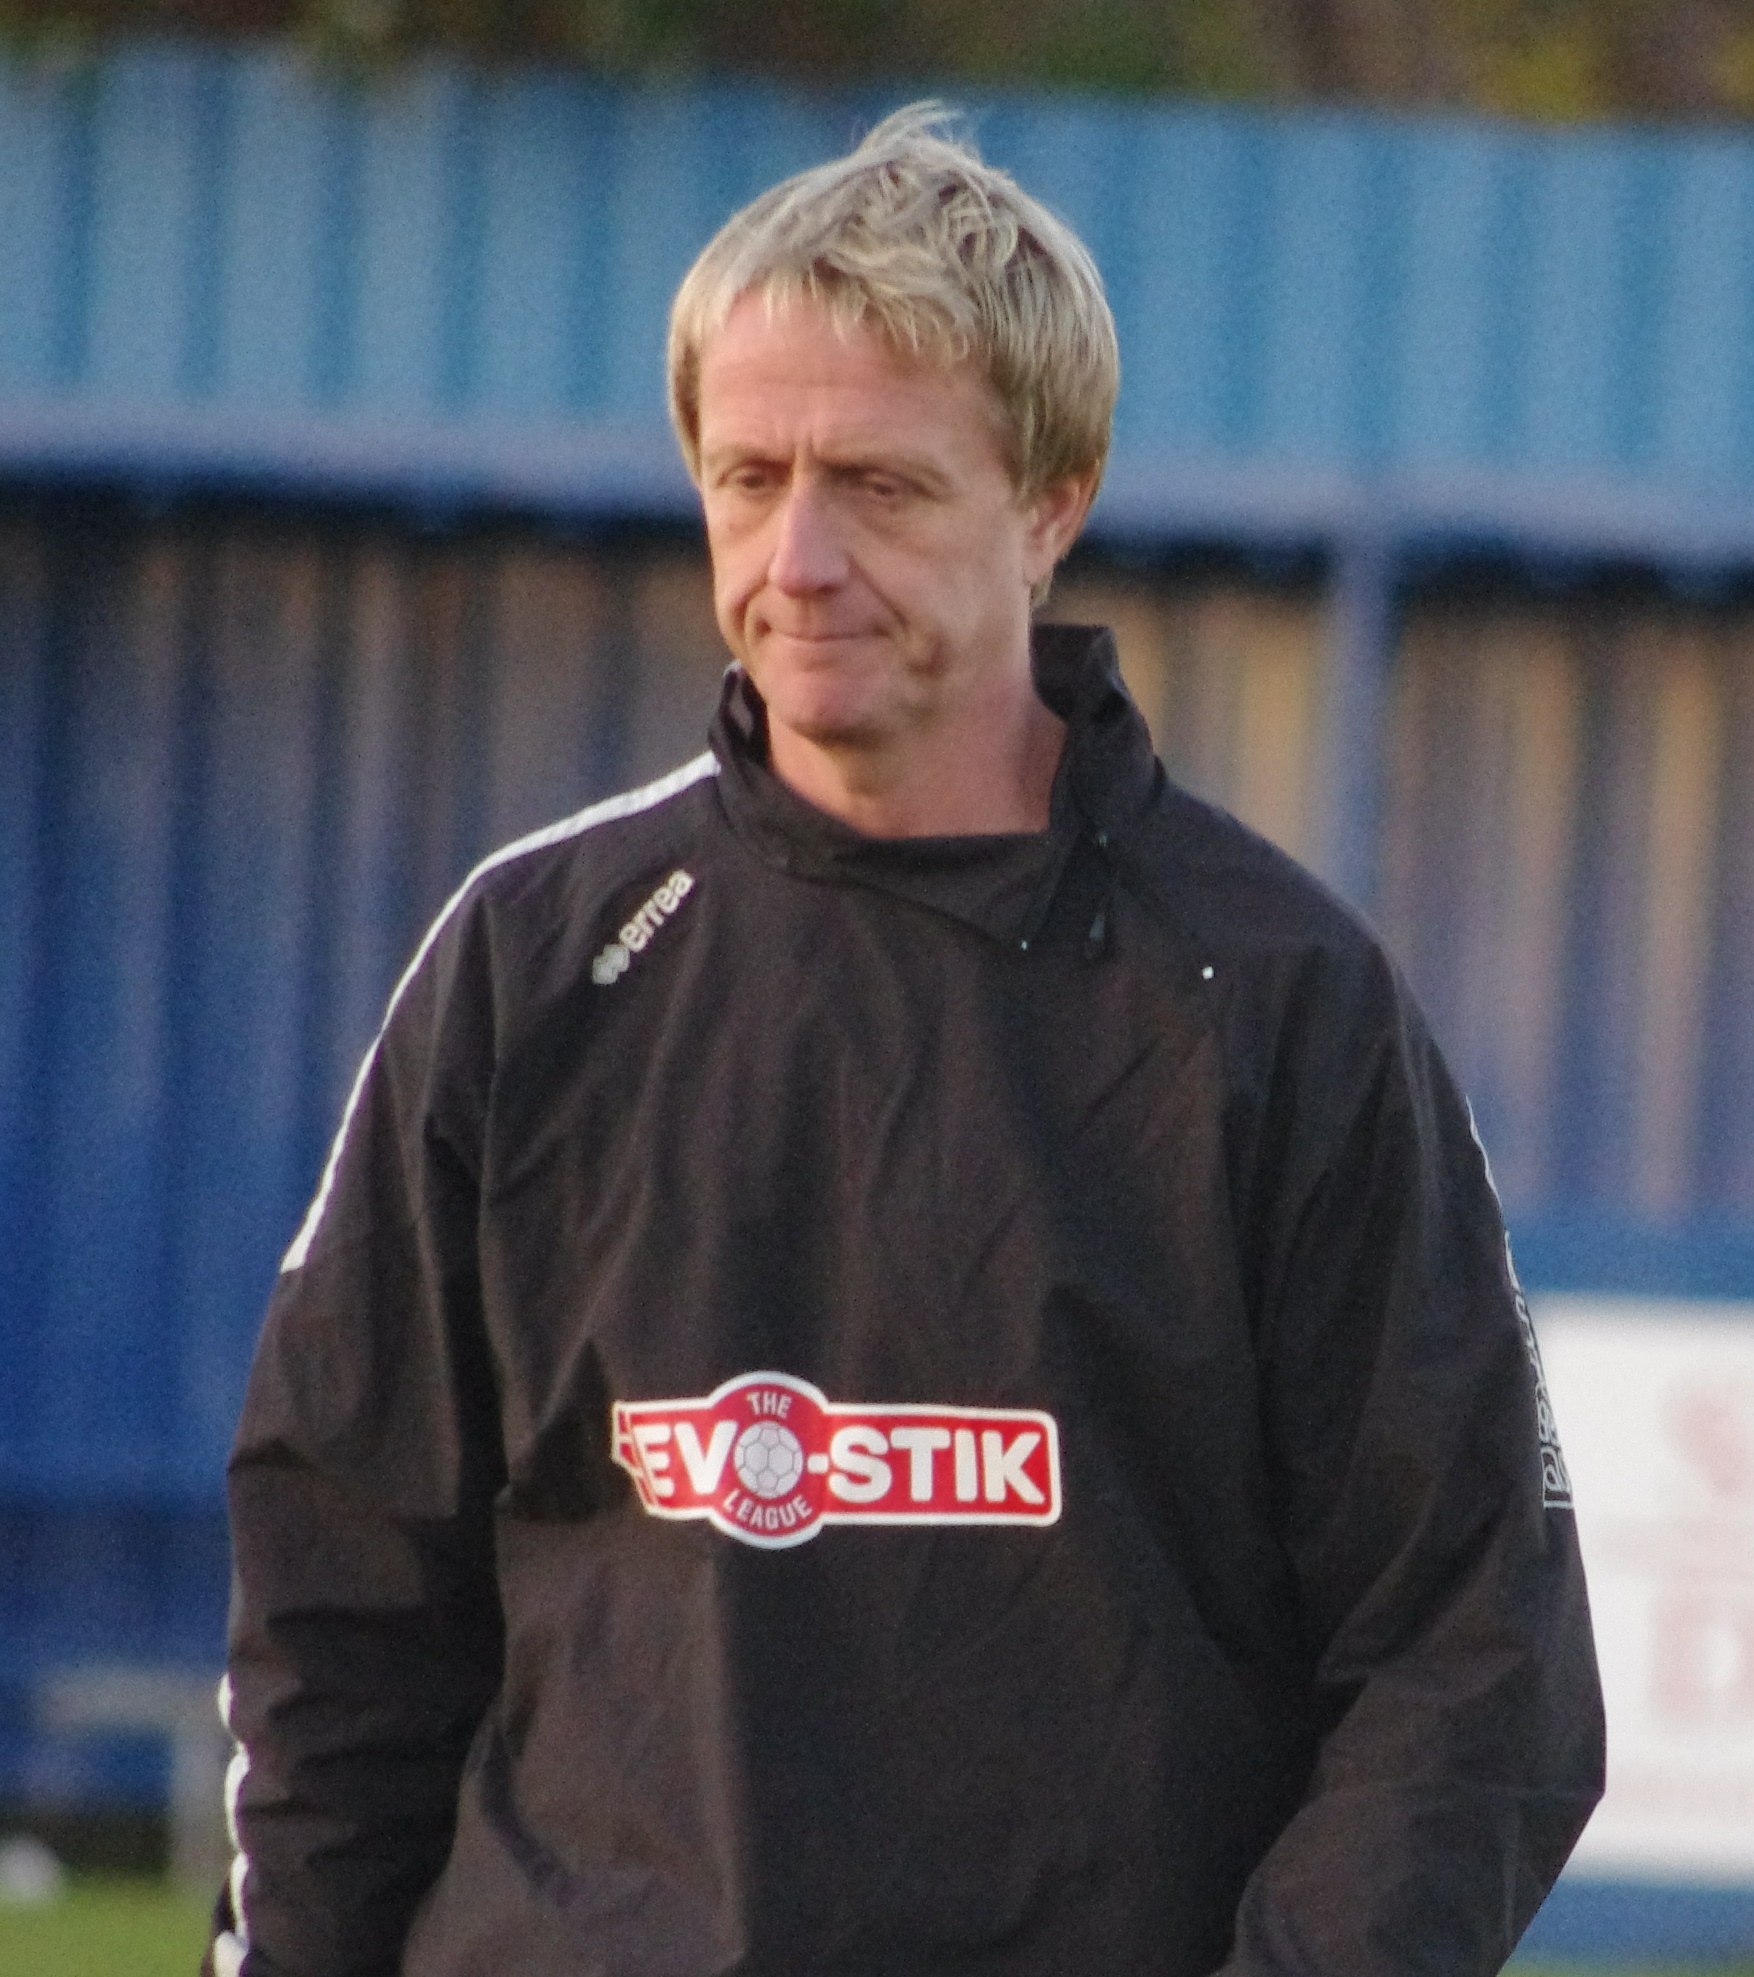 Paul Lines watched his Wakefield FC team boost their survival hopes on Tuesday night